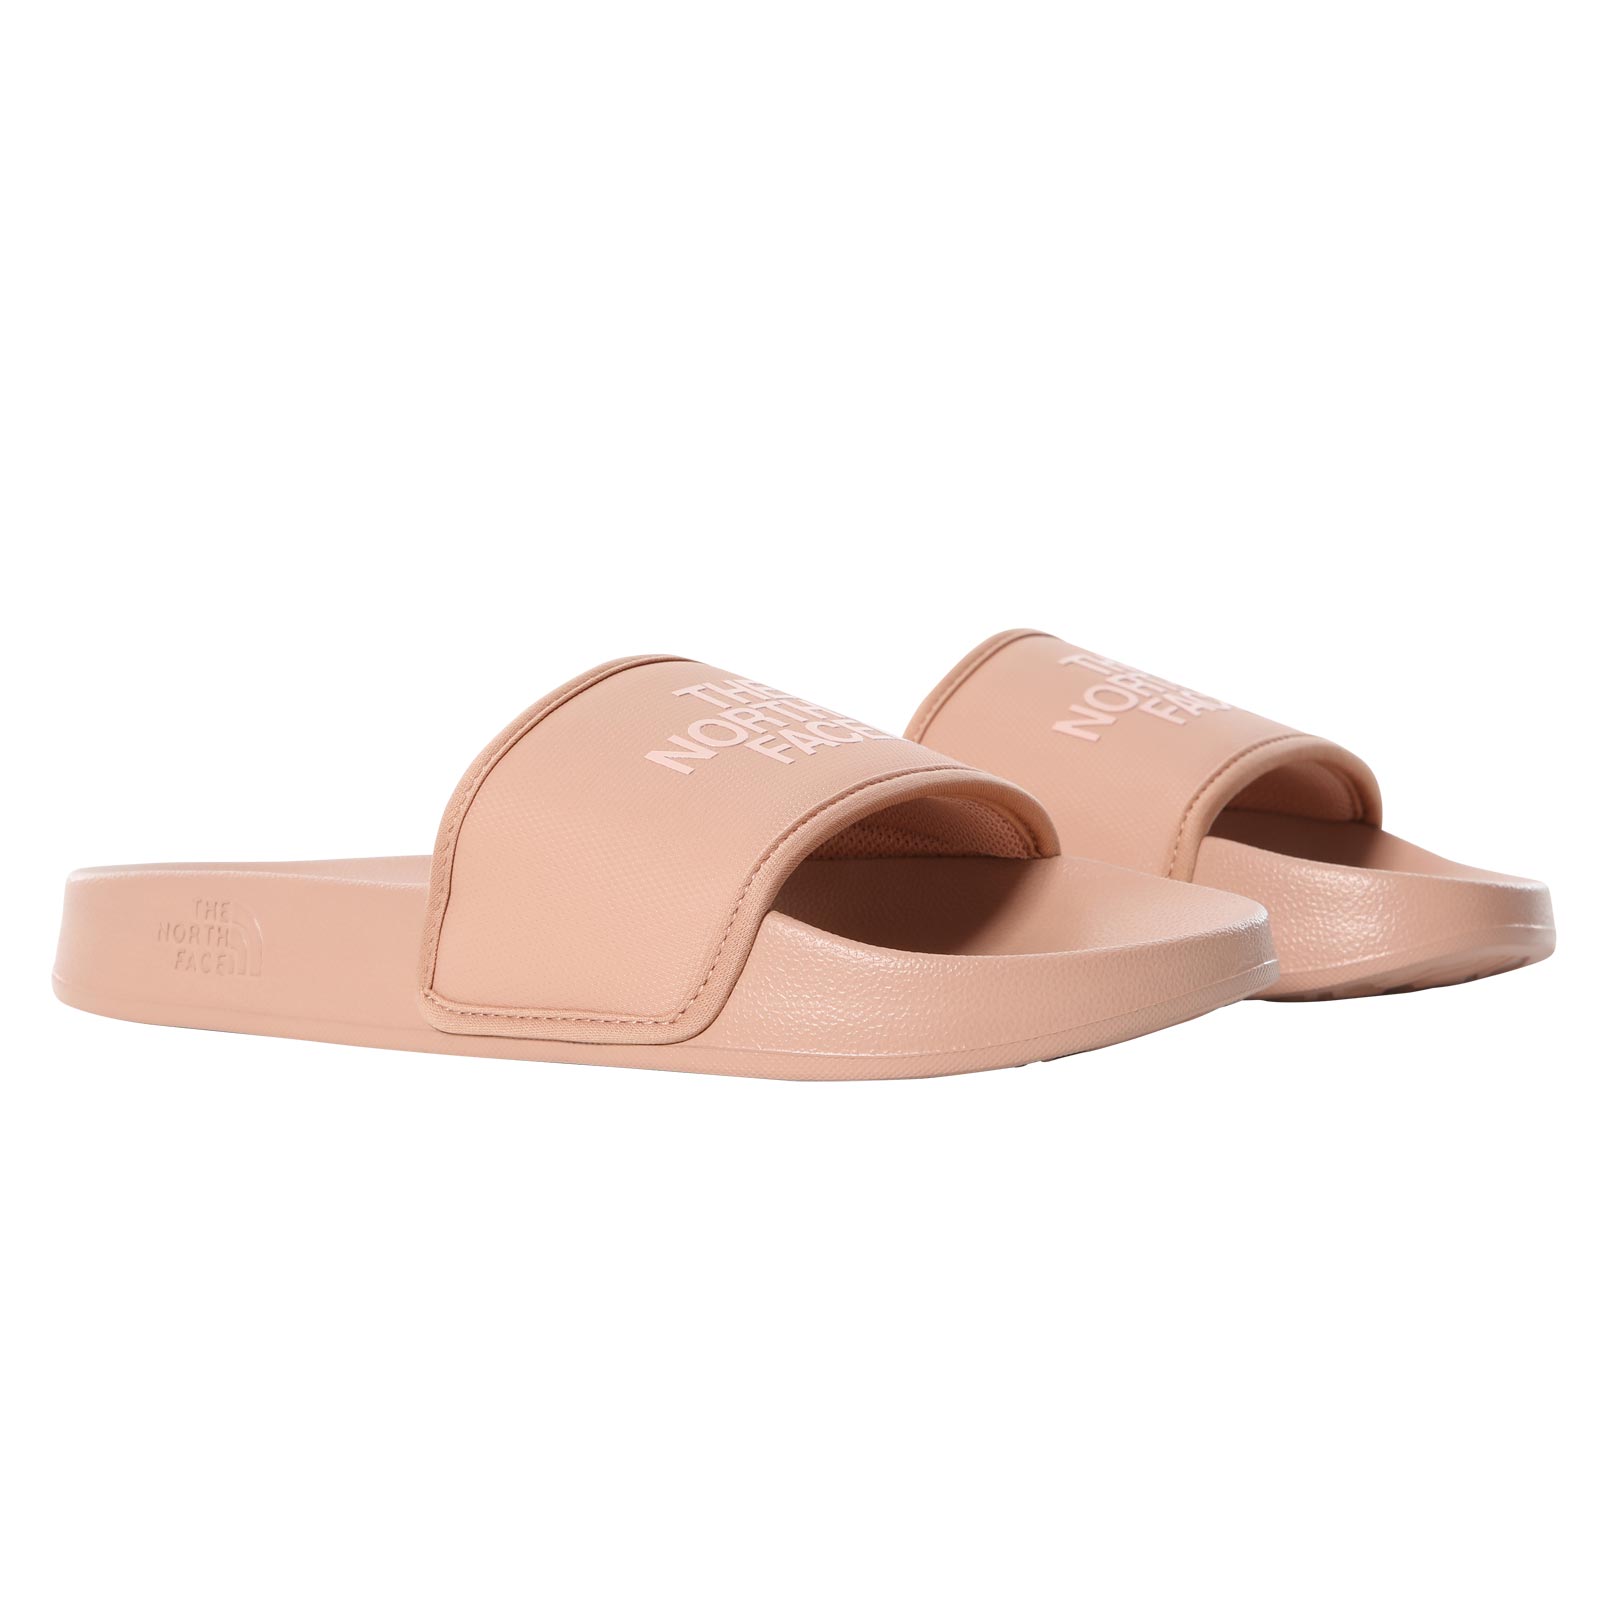 THE NORTH FACE BASE CAMP III WOMENS SLIDES